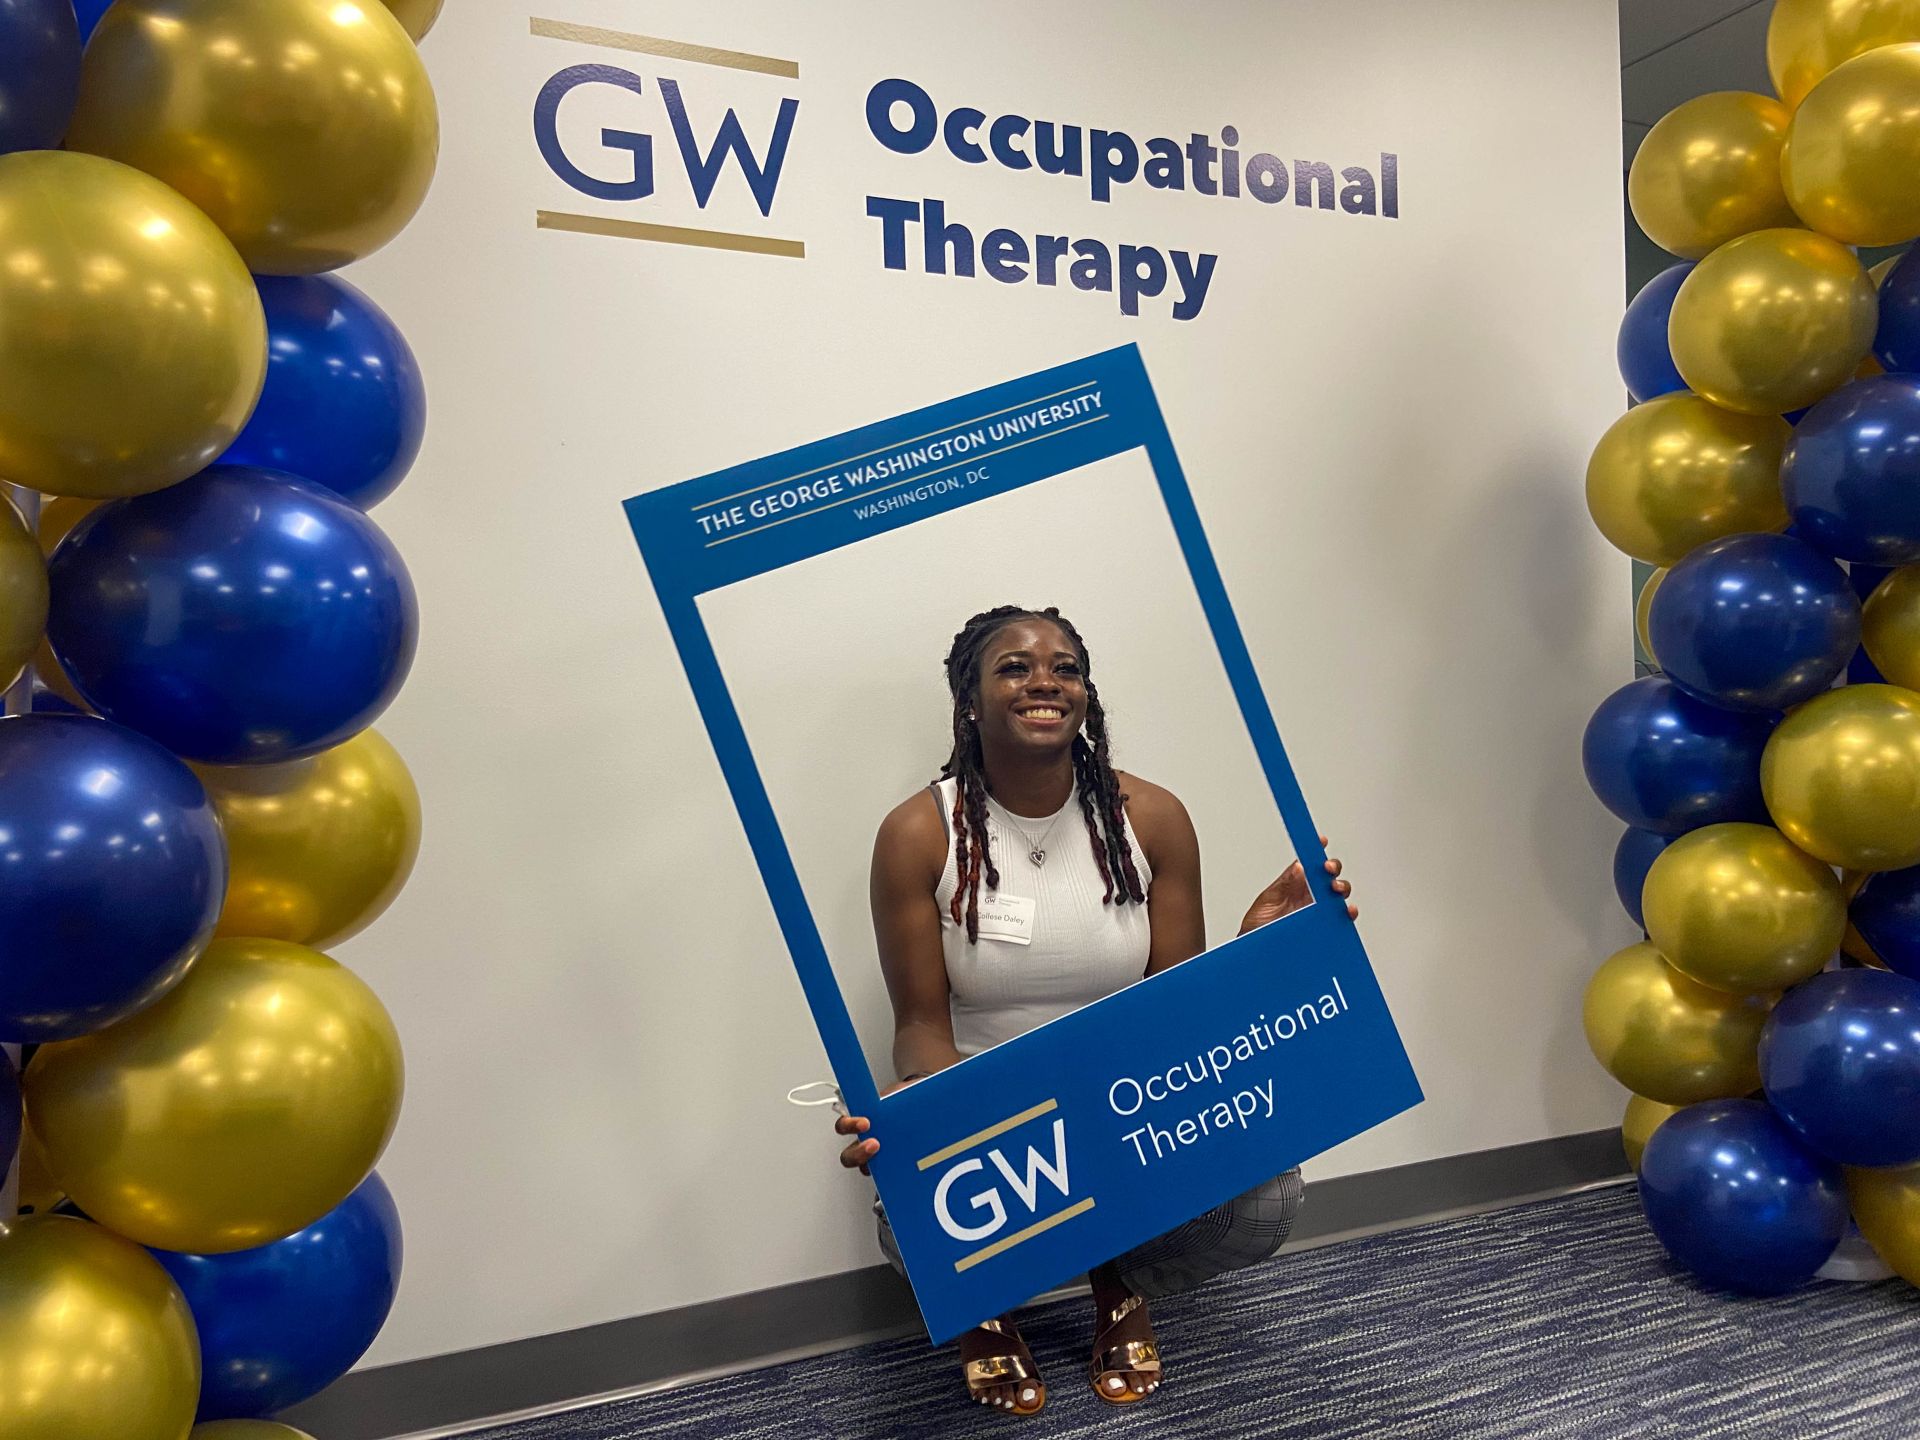 Student with picture frame sign in front of GW OT logo sign